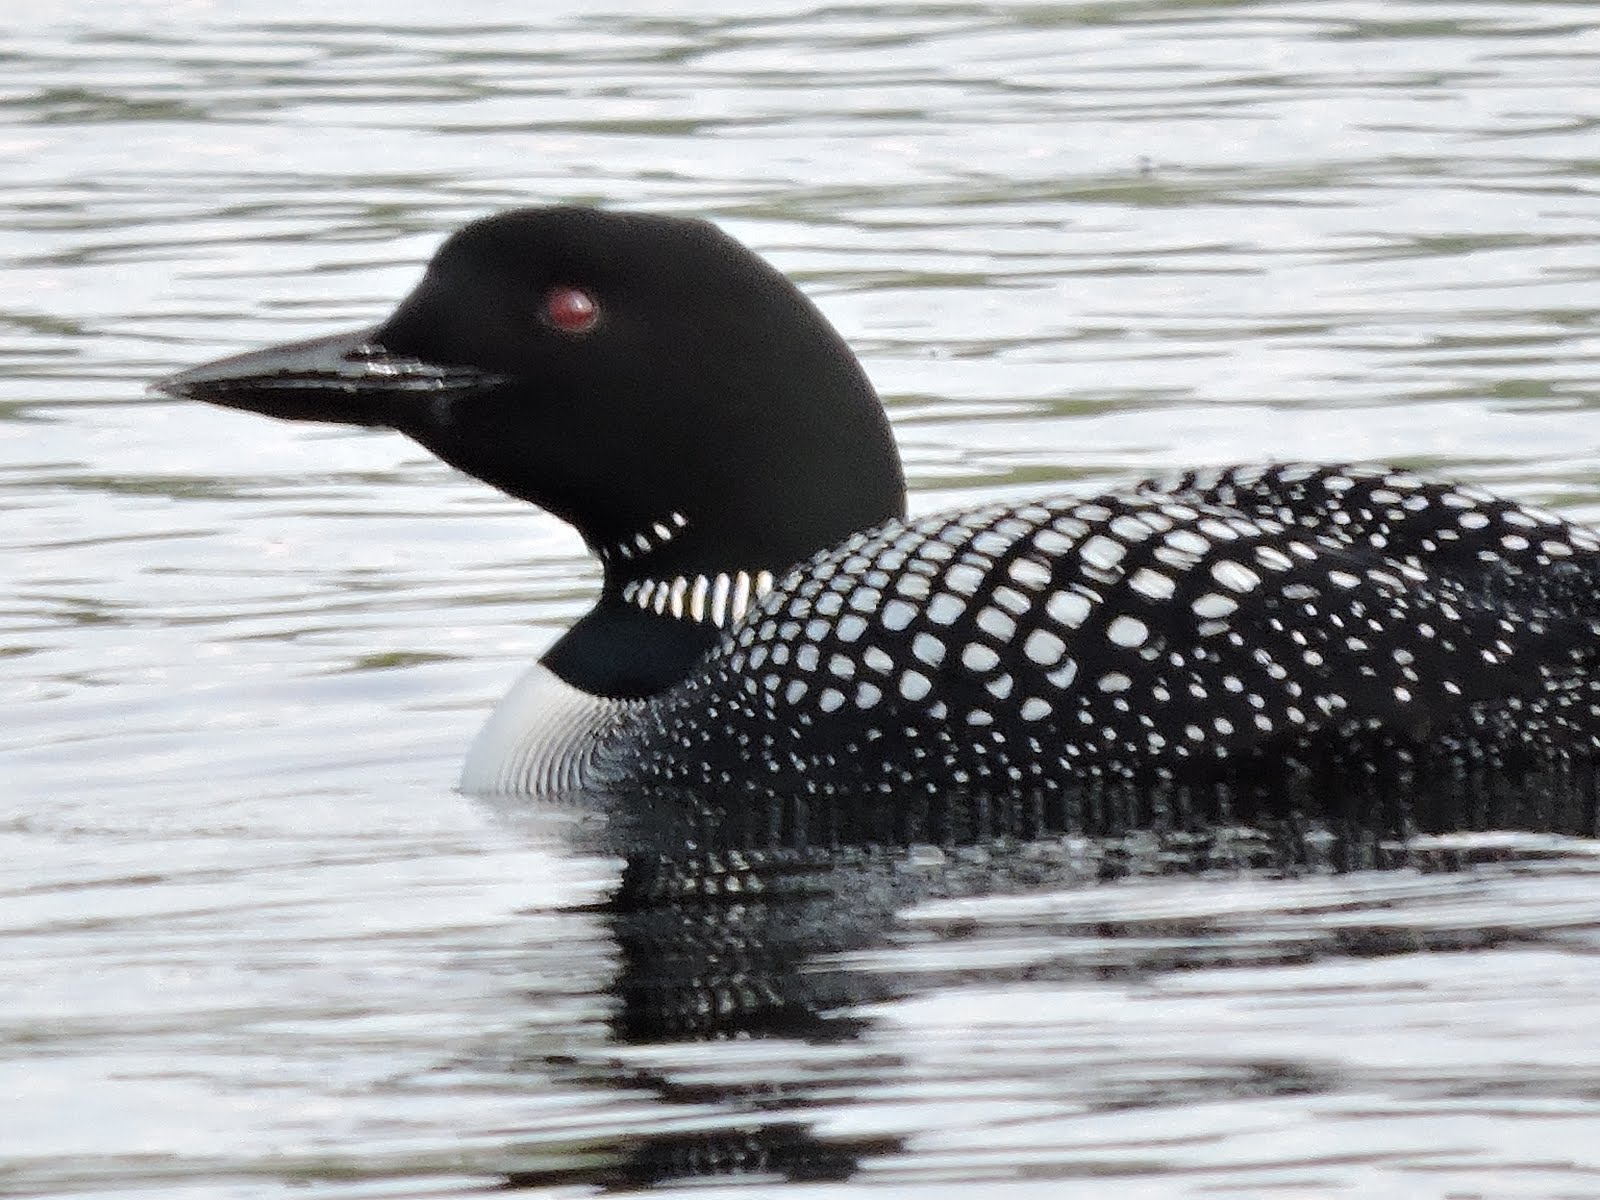 Loving Loons, because I'm Loony